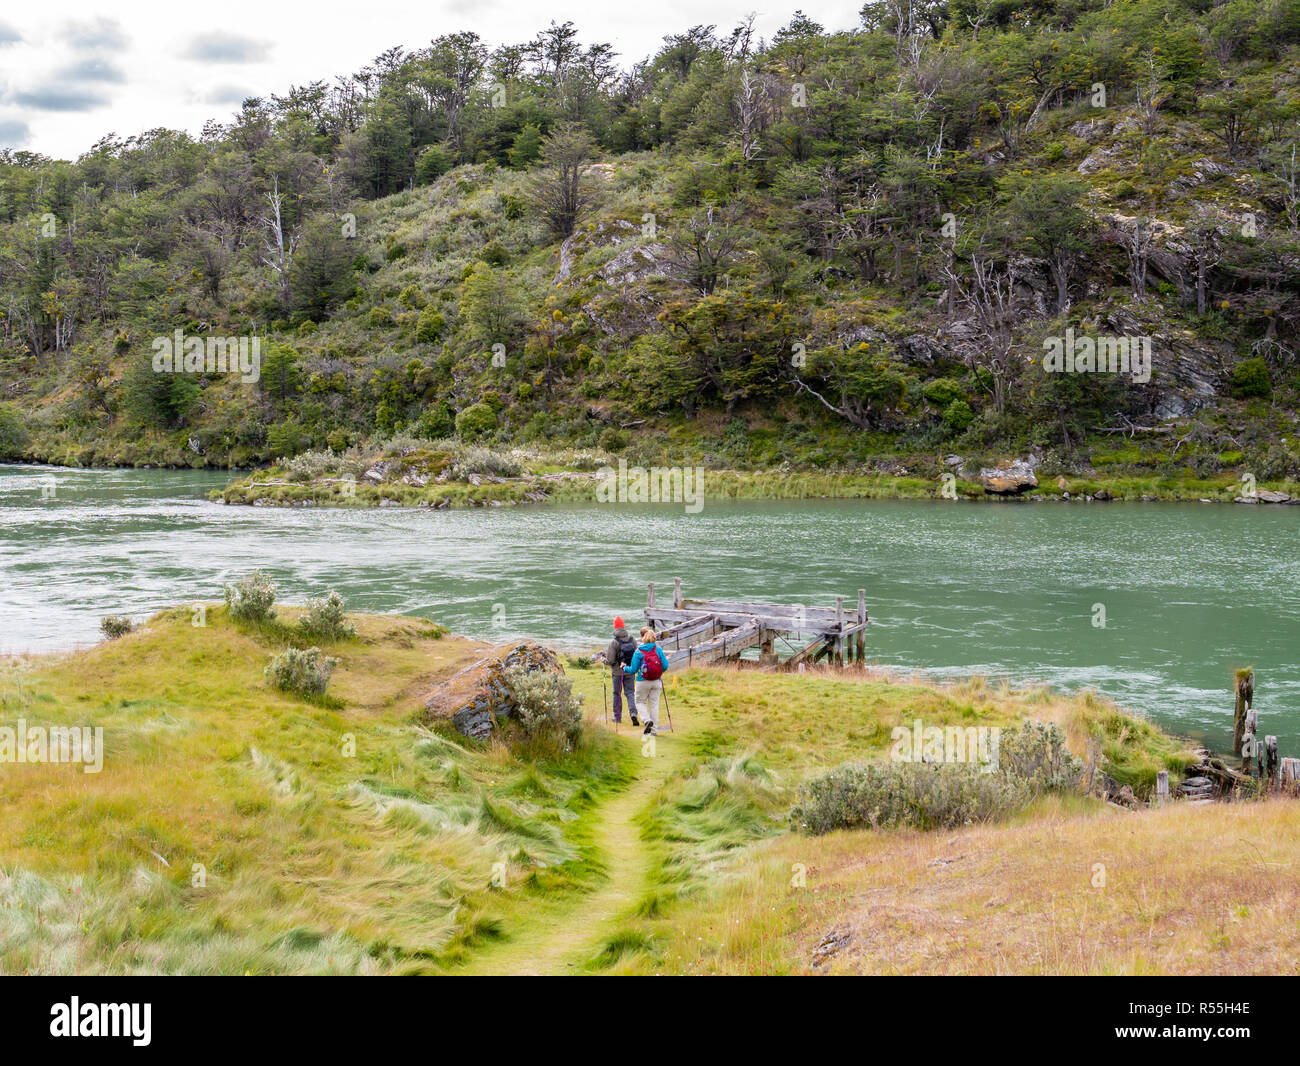 People walking on trail of Paseo de la isla, Island hike, along Lapataia River in Tierra del Fuego National Park, Patagonia, Argentina Stock Photo